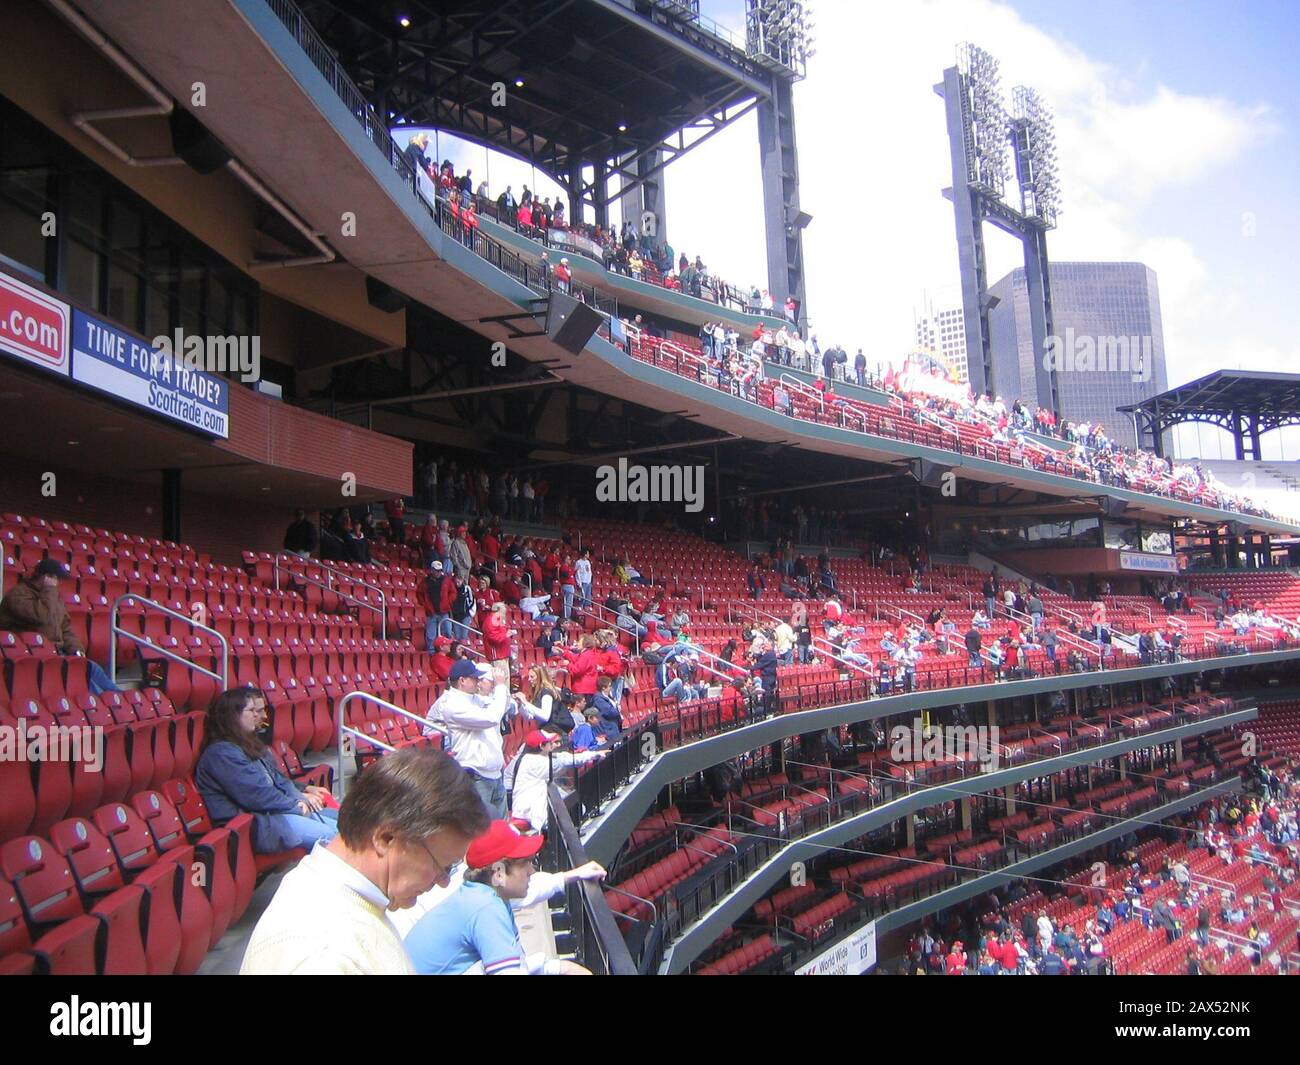 Image Take At Busch Stadium Open House High Resolution Stock Photography And Images Alamy